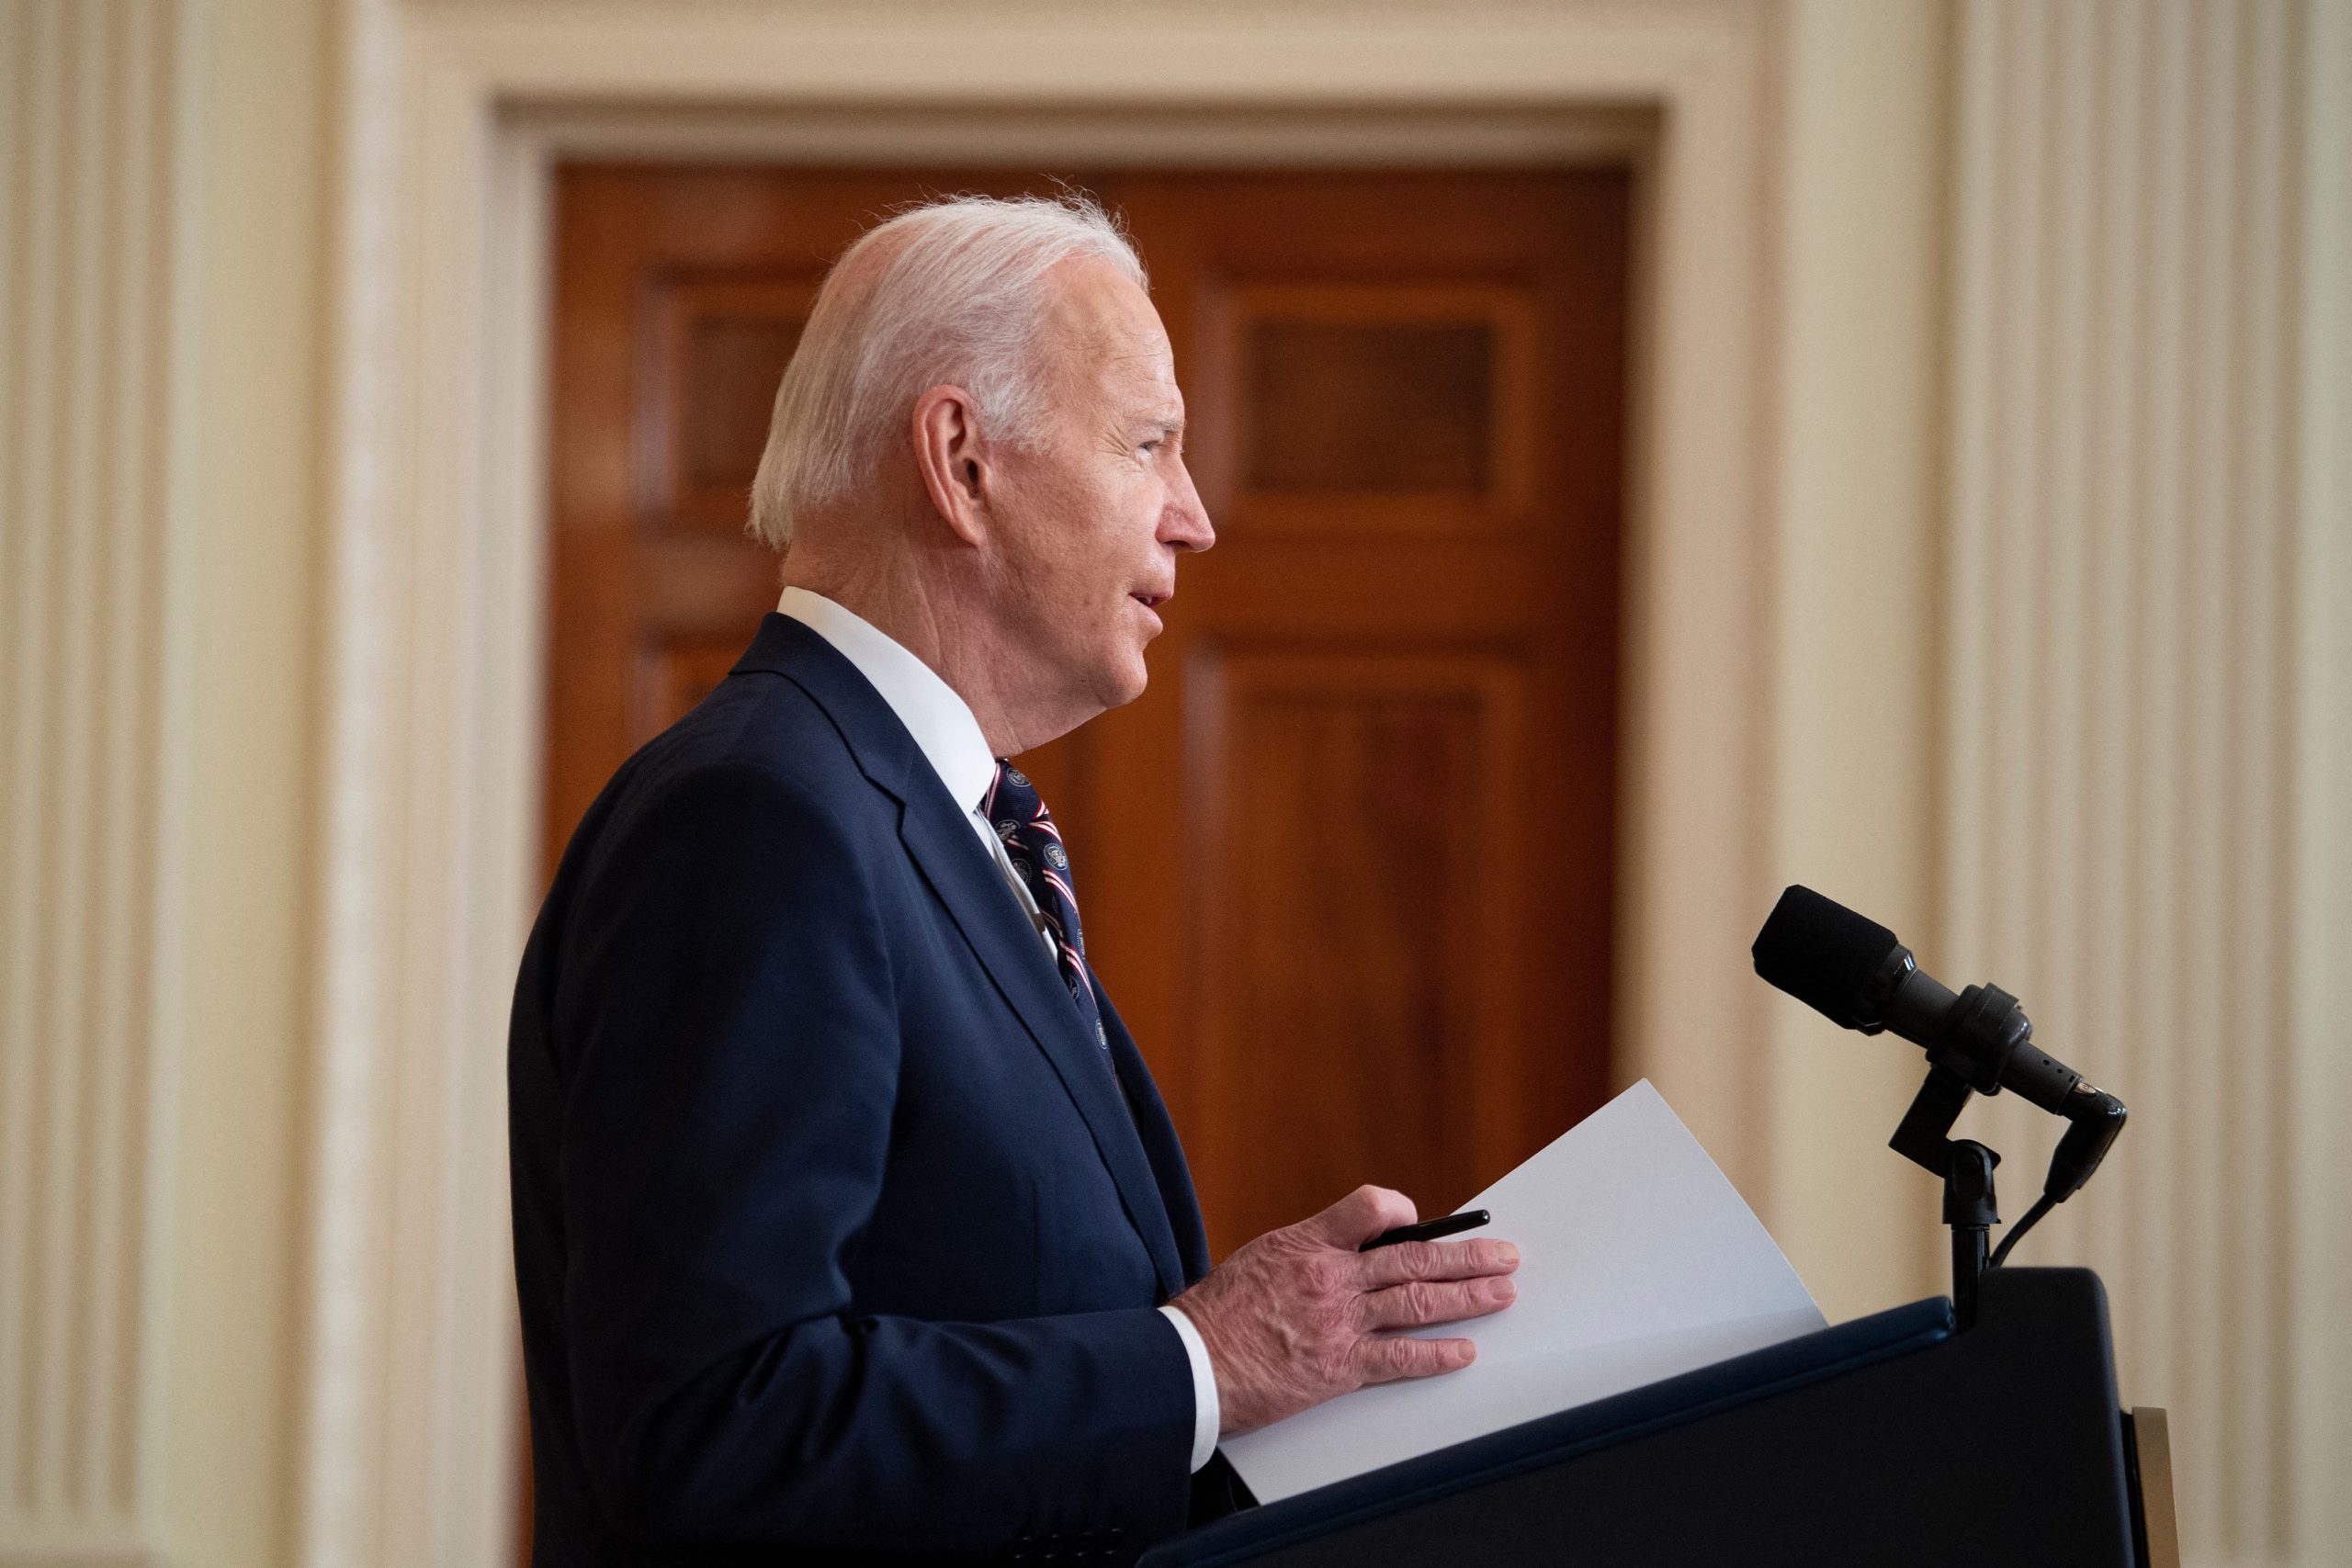 President Joe Biden outlines the first round of sanctions his administration would impose in response to Russia's invasion of Ukraine at the White House on Tuesday. (Brendan Smialowski/AFP via Getty Images)